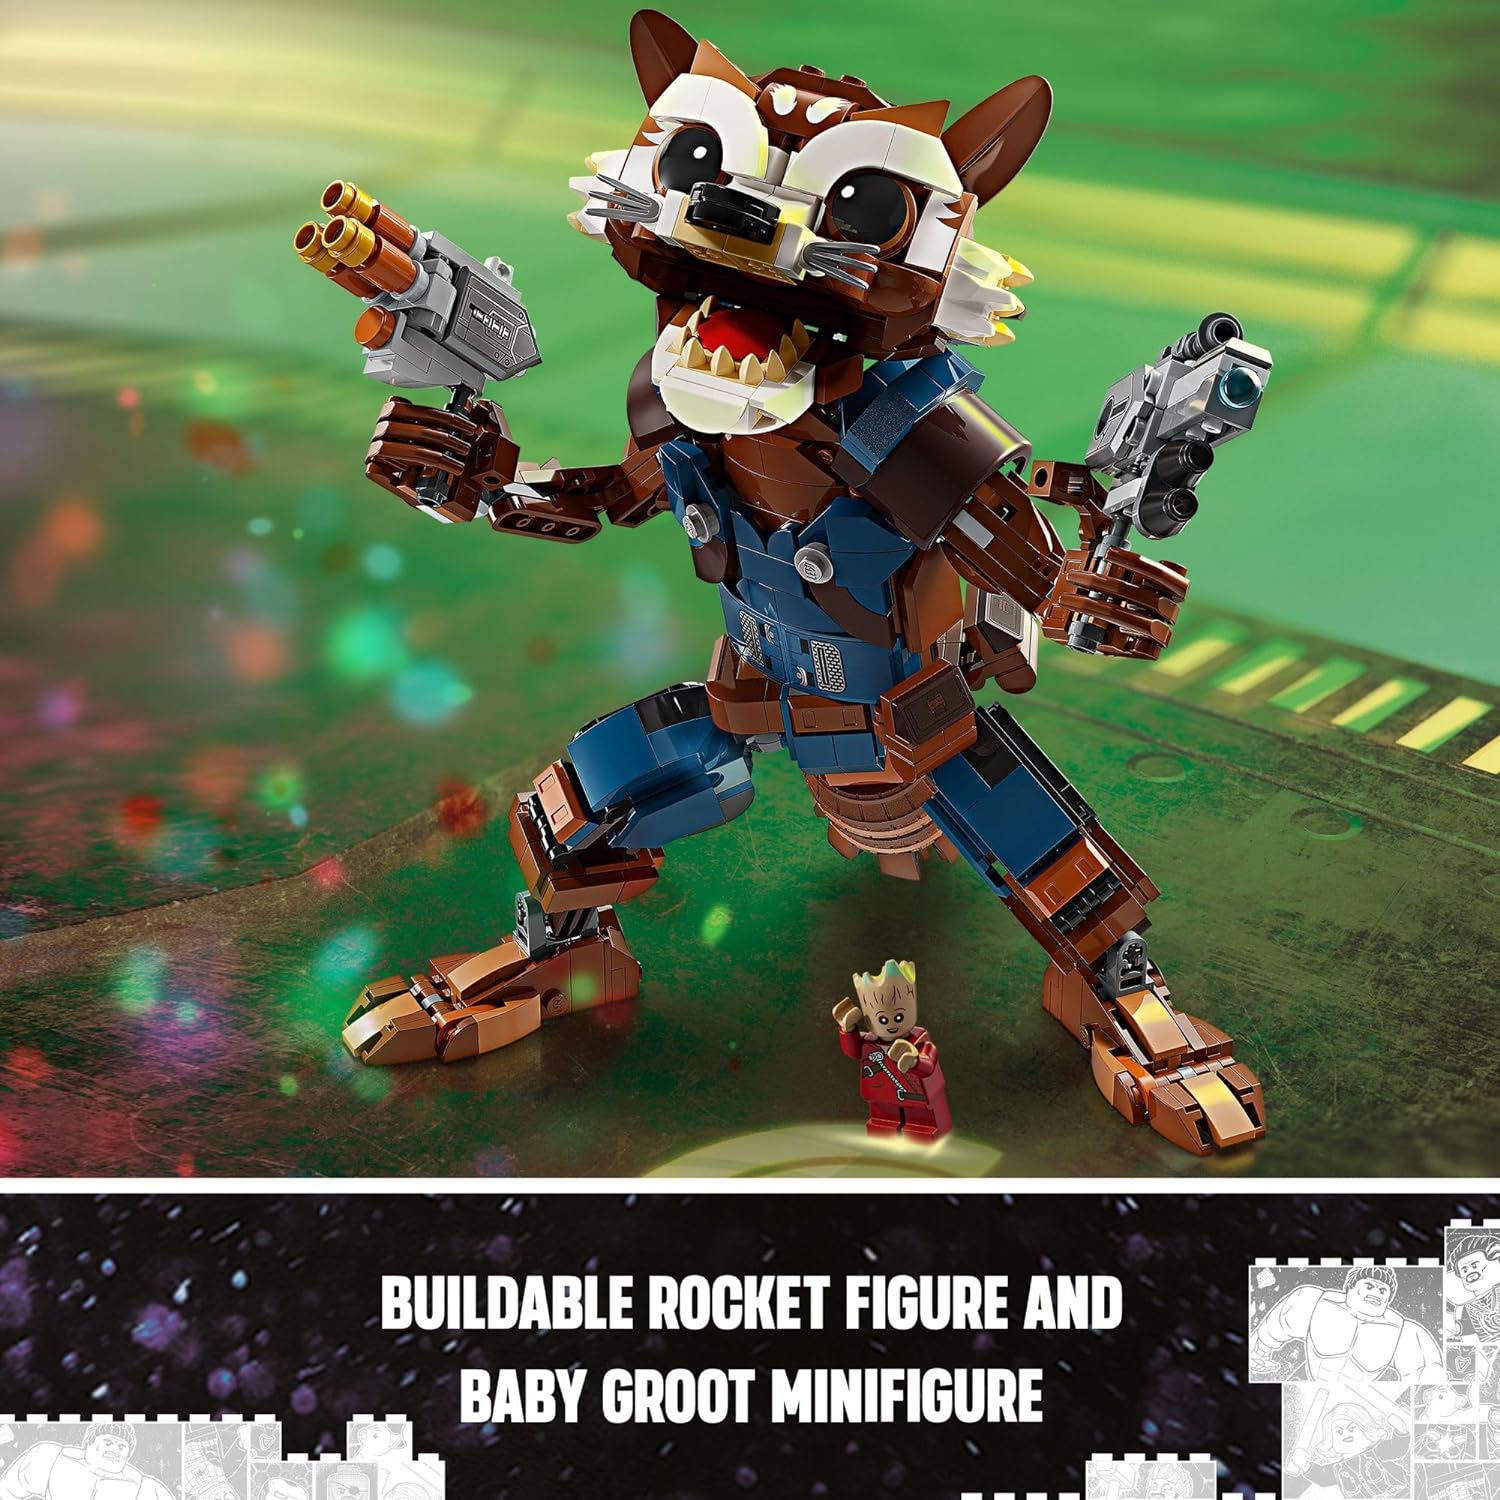 LEGO 76282 Marvel Rocket & Baby Groot Minifigure, Guardians of The Galaxy Inspired Marvel Toy for Kids, Buildable Marvel Action Figure for Play and Display.